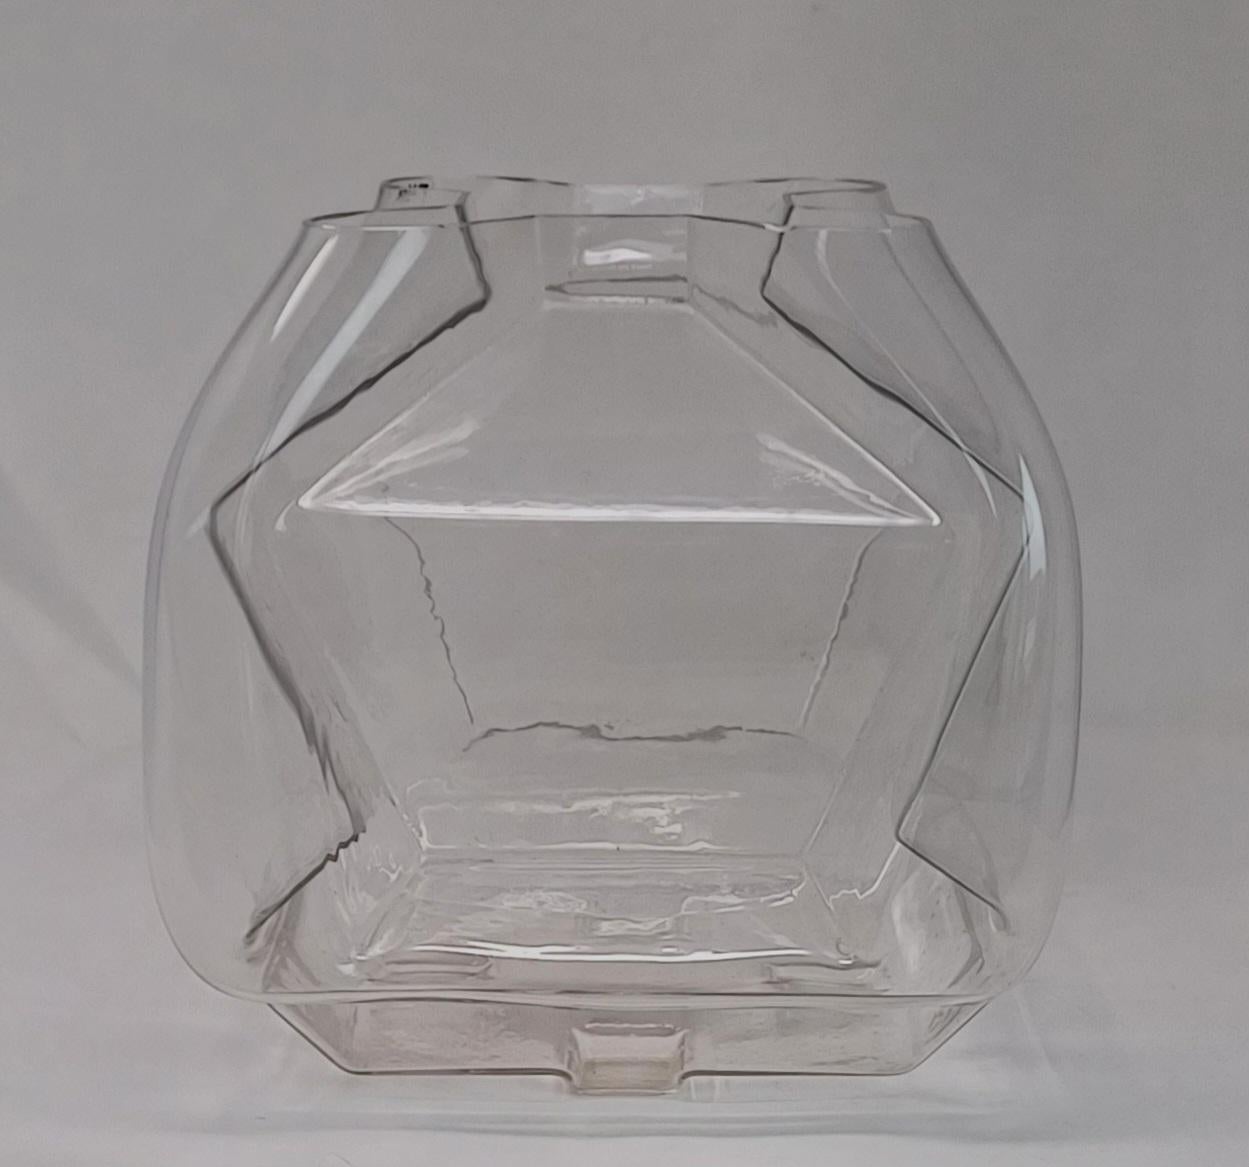 Blown Glass vase by Toni Zuccheri for VeArt, 1973, with it's original label still on  the vase.
(similar model documented in  the Book 